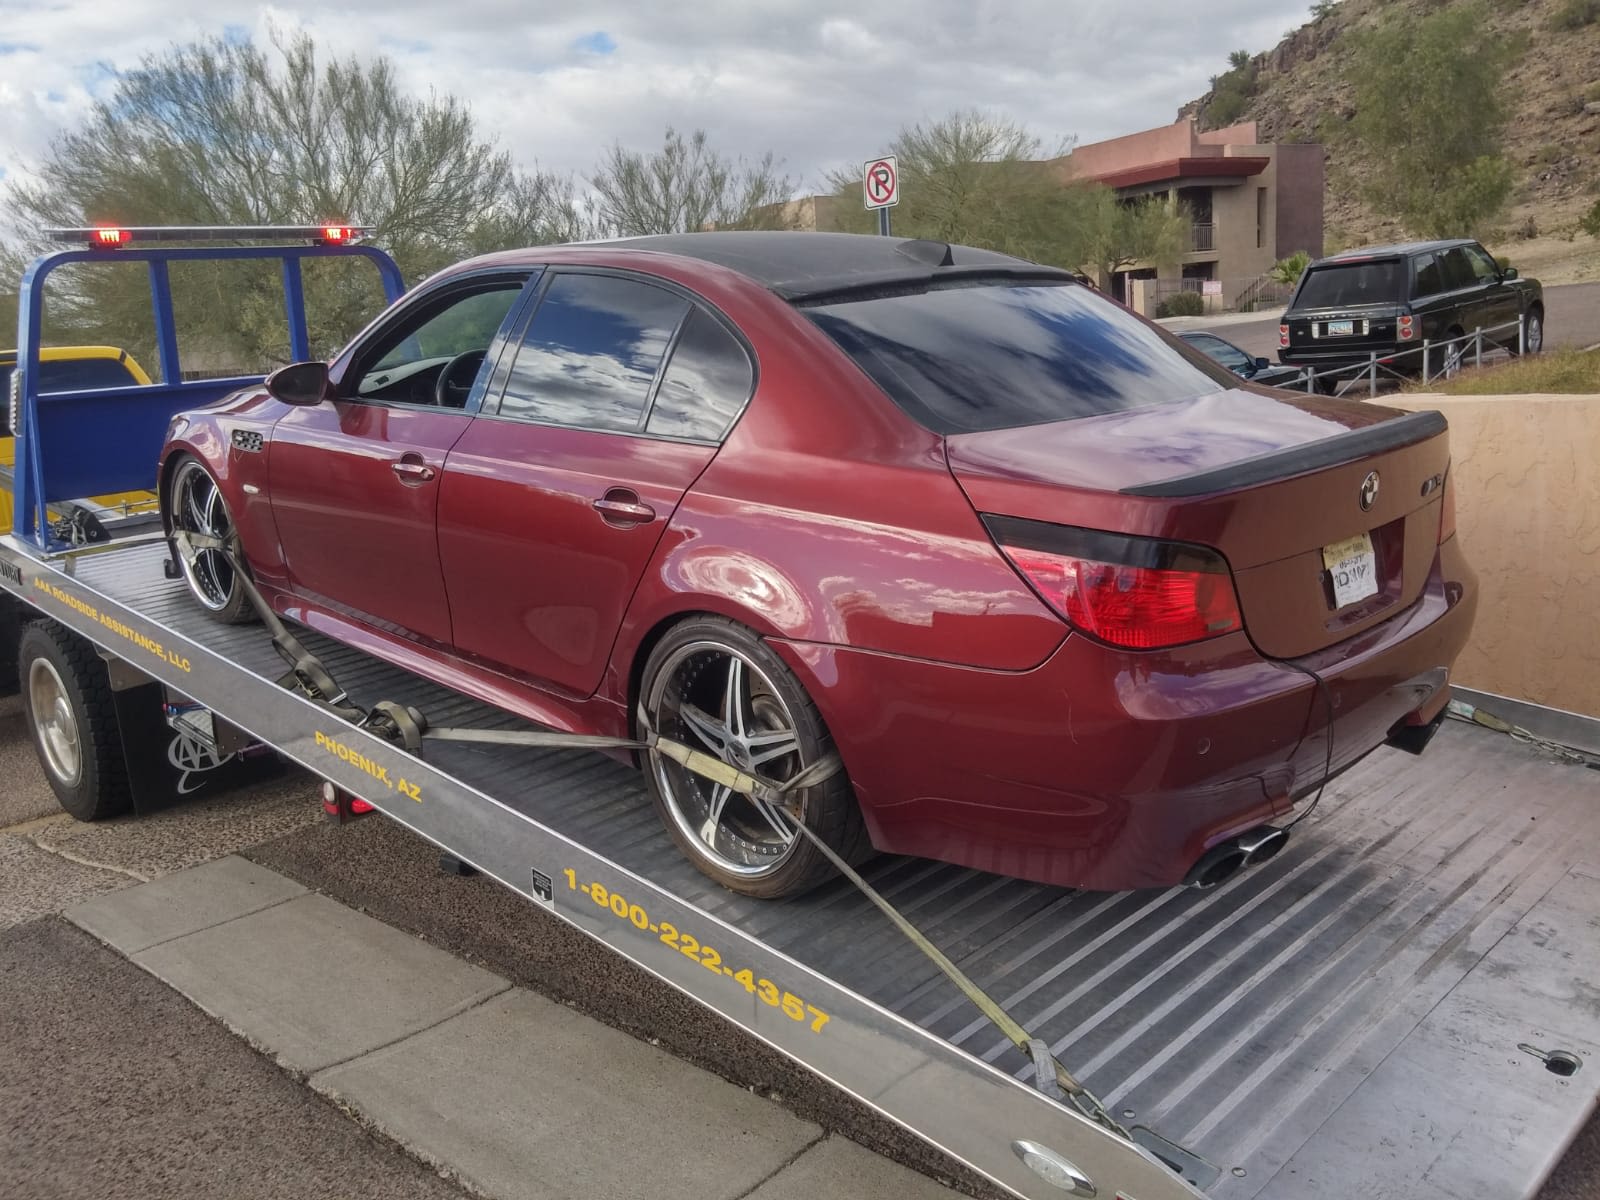 Like all good projects, this one arrived on a flatbed. The tow truck driver was not pleased with how low it was, and nearly refused to tow it.